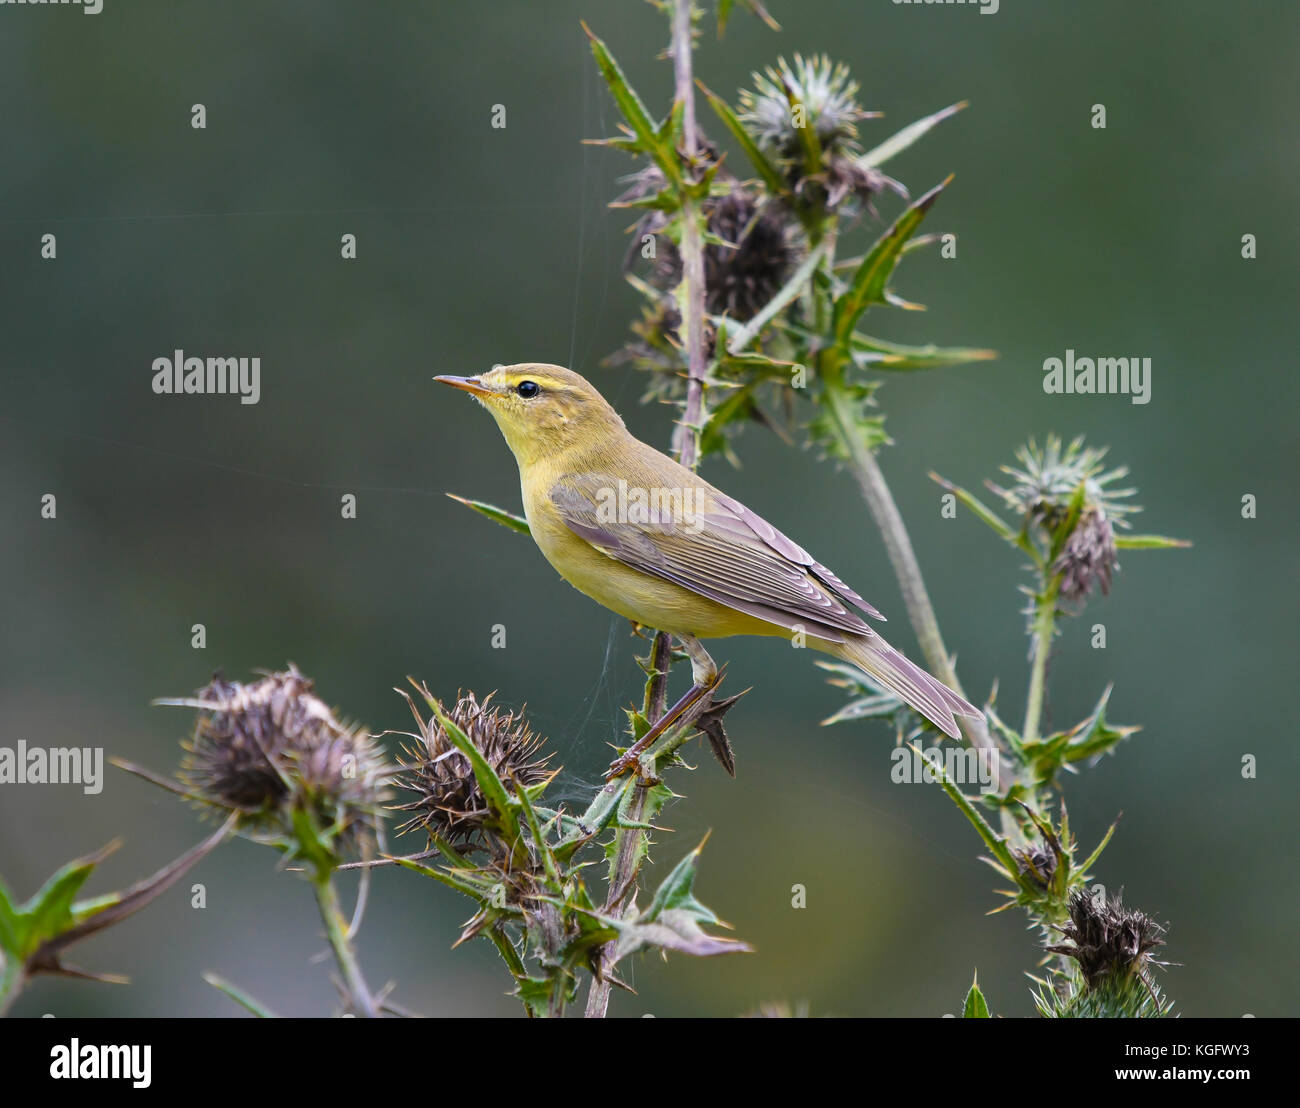 Common chiffchaff perched on a thistle Stock Photo